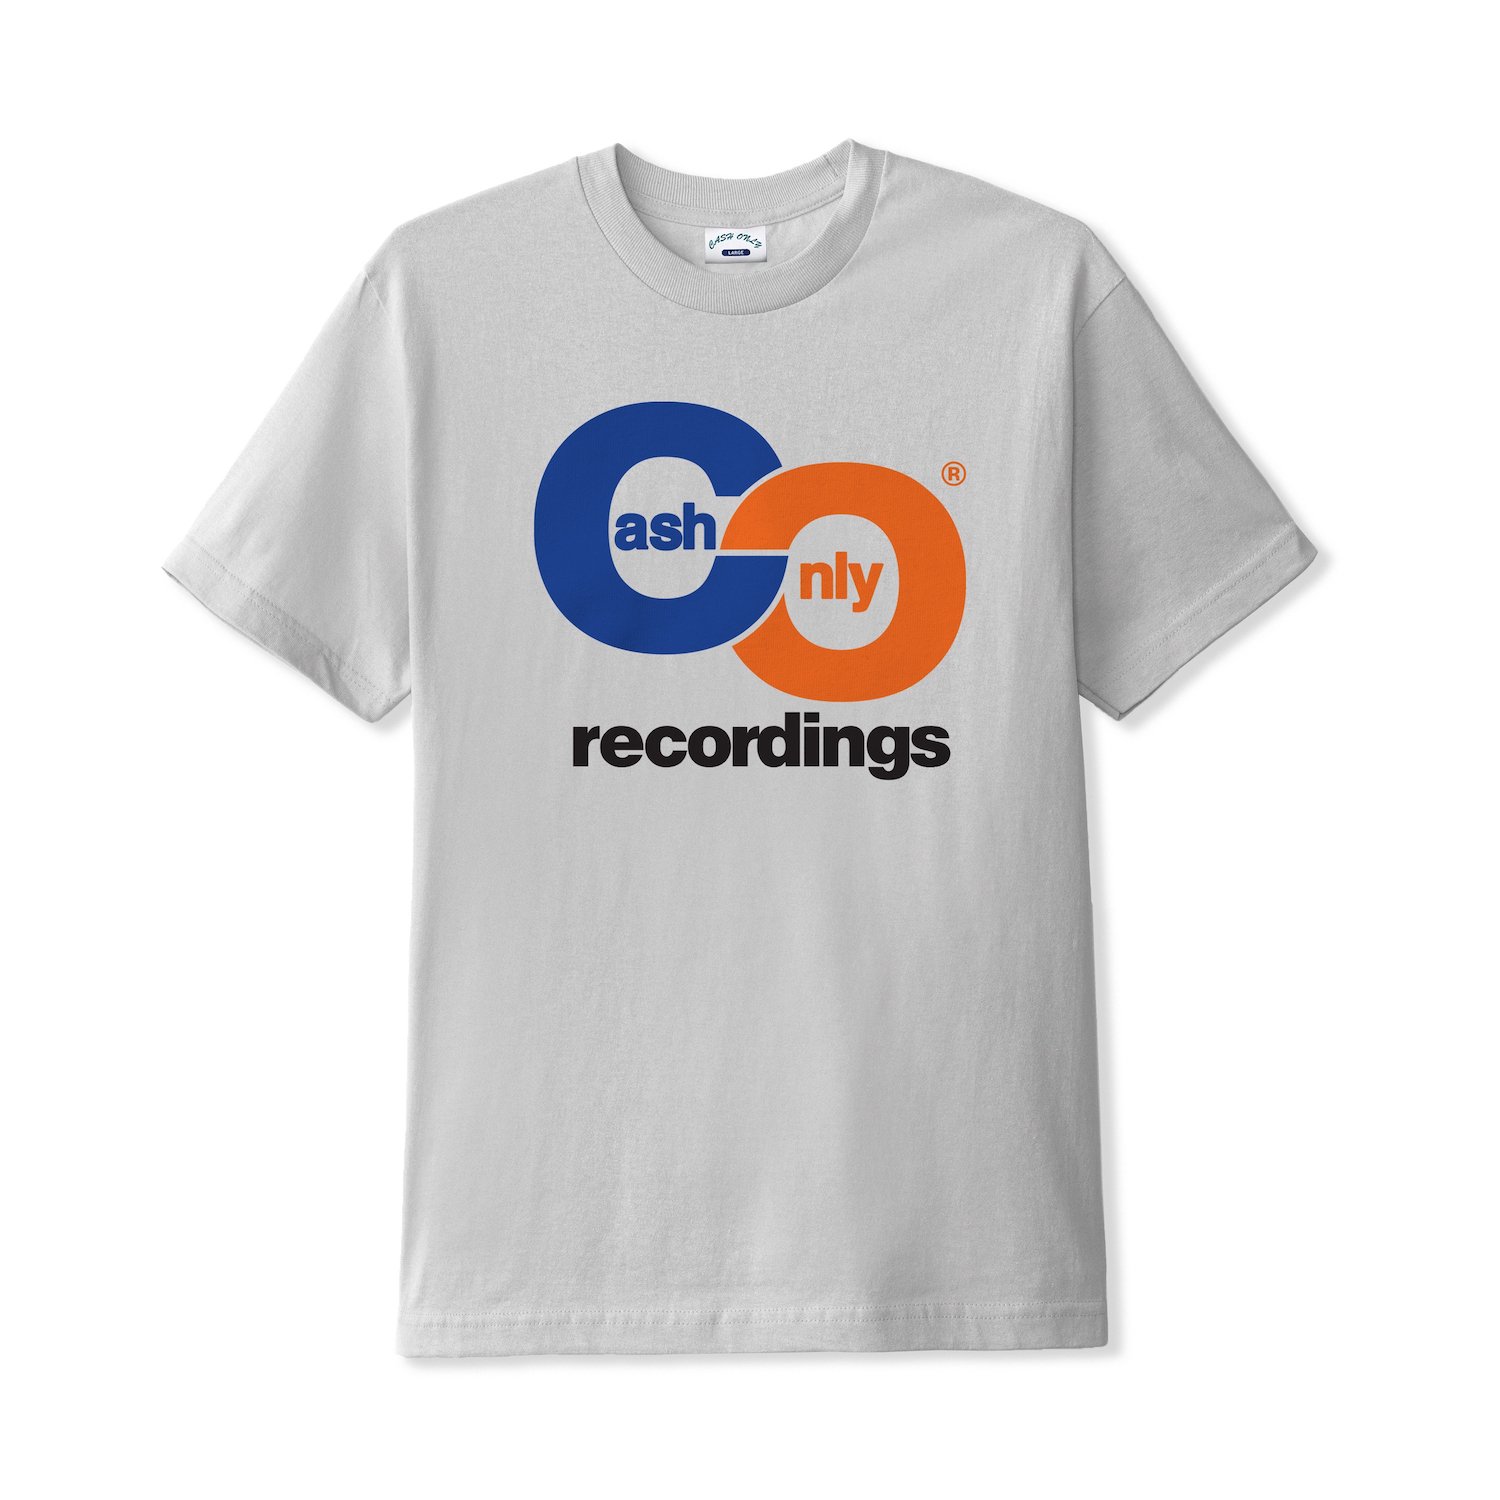 Cash Only<br>Recordings Tee<br>